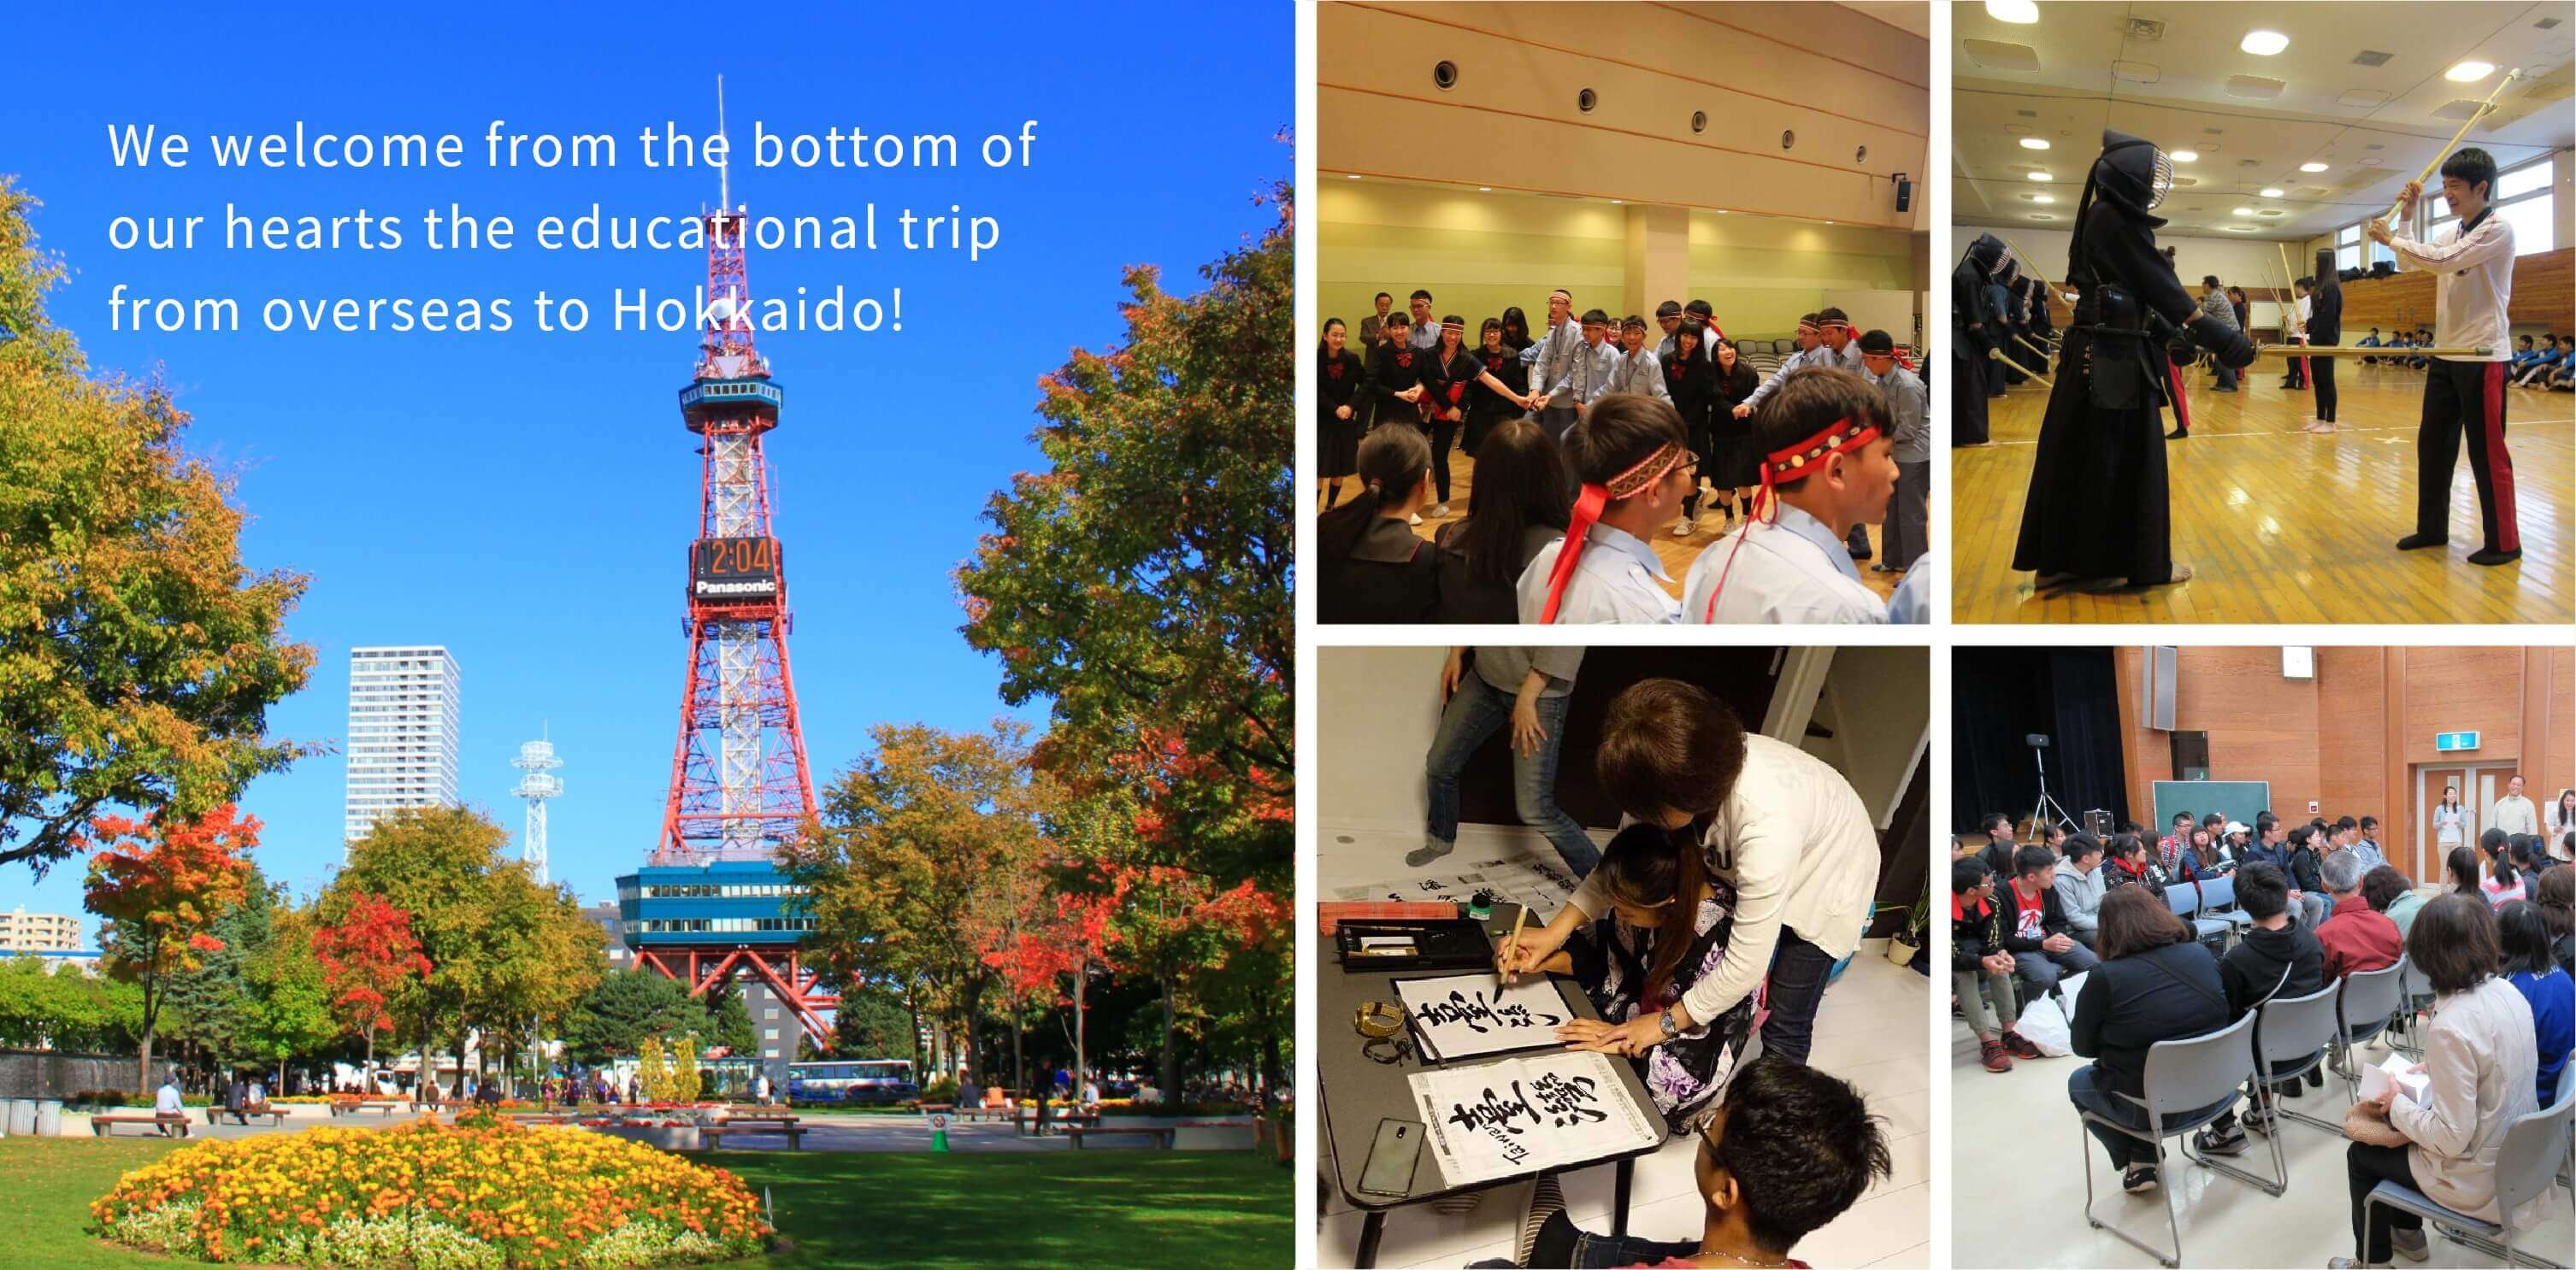 The Association for the Promotion of International Educational Visits to Hokkaido